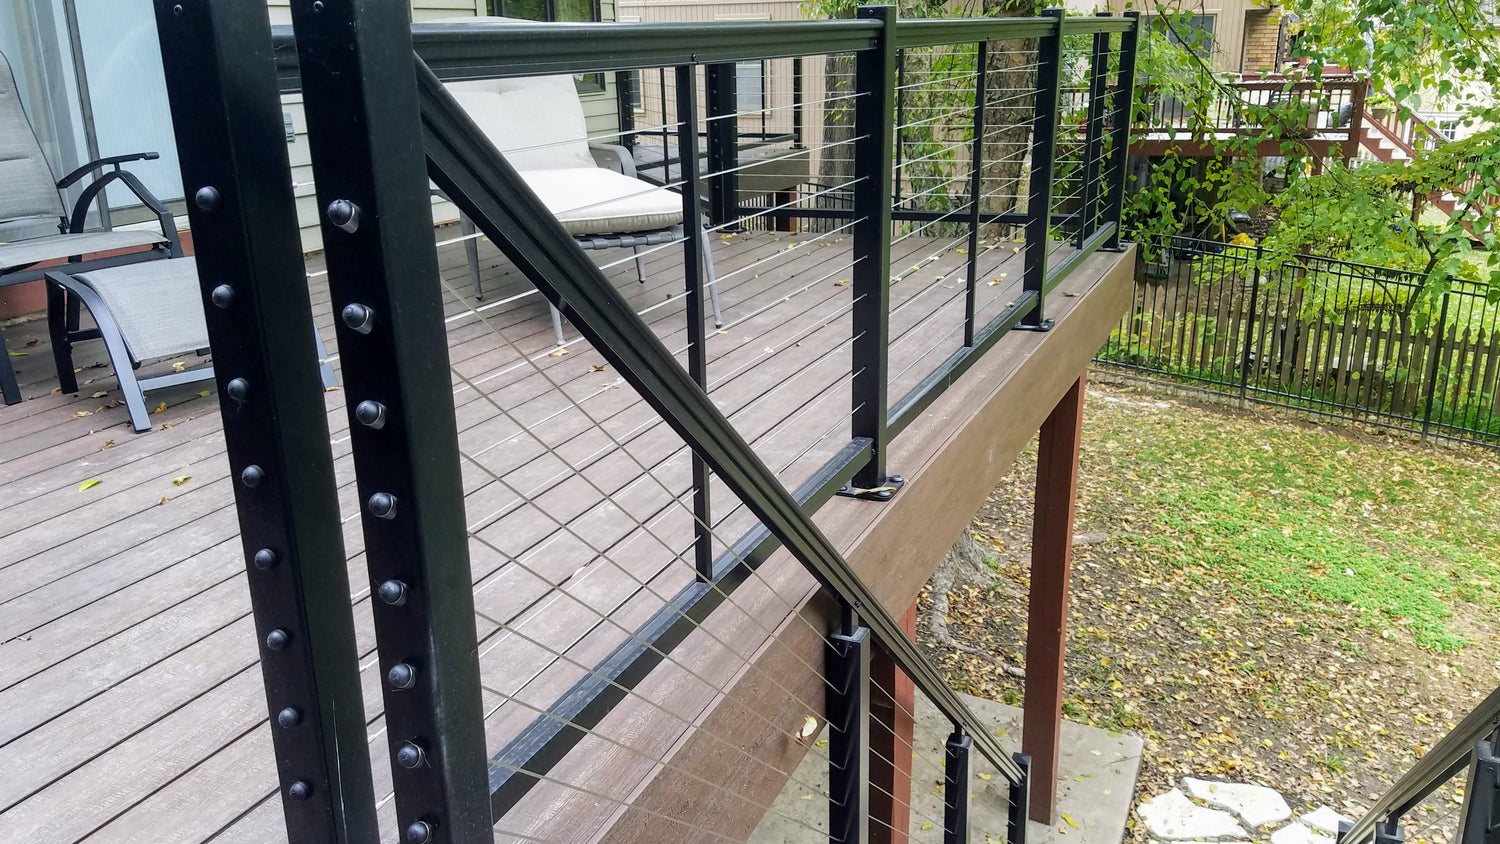 Cable railing like this horizontal cable strung through feeney designrail kit posts with cablerail kits by feeney are perfect for diy cable handrail and are in stock for sale